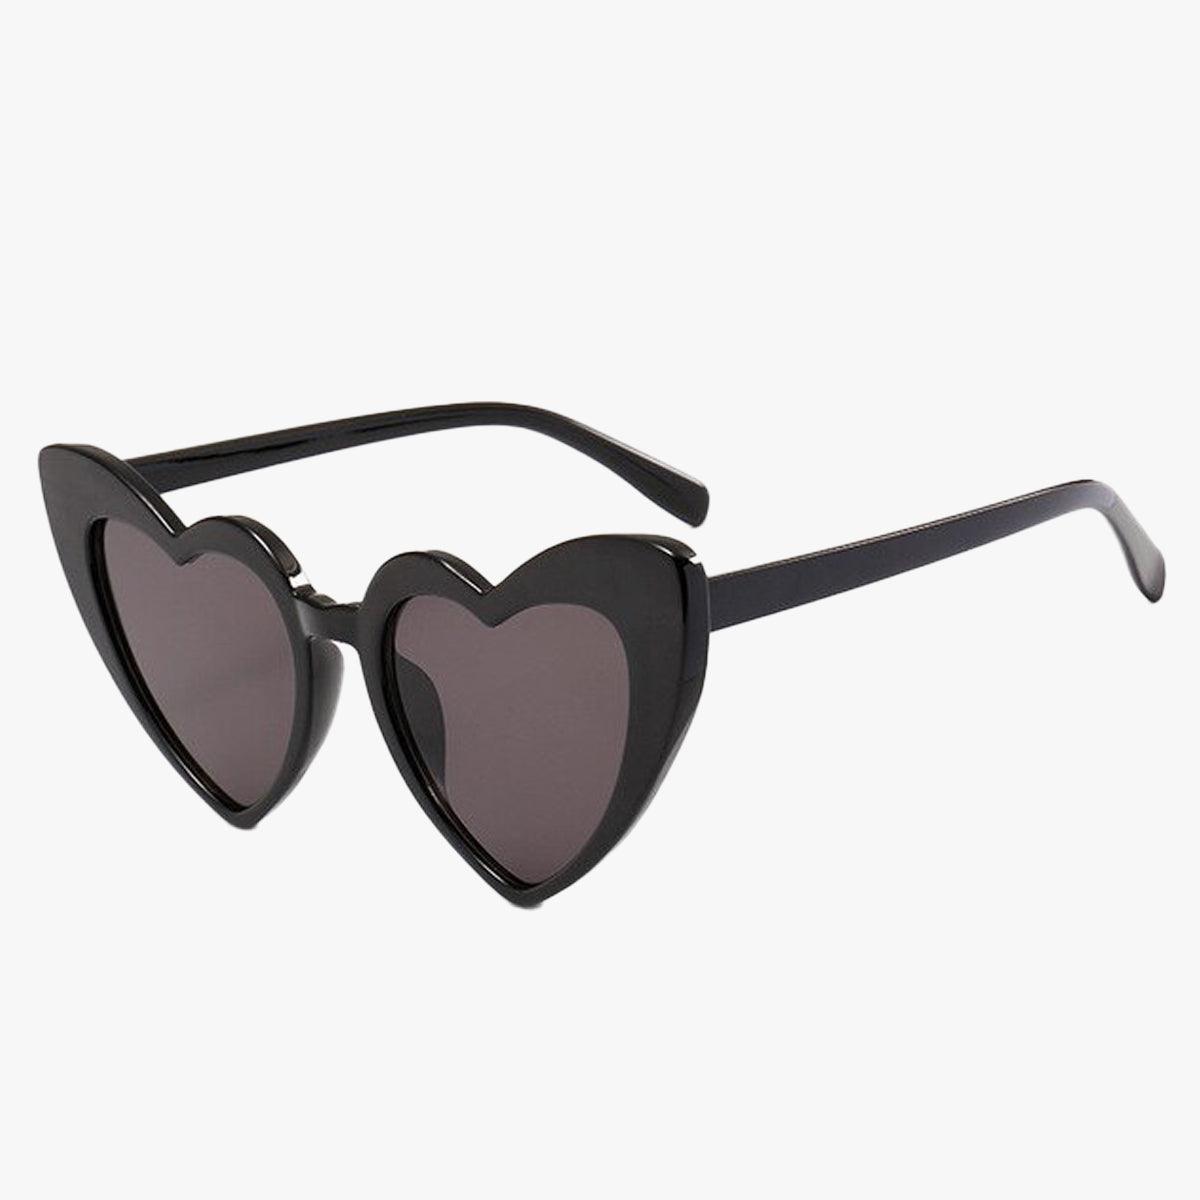 Aesthetic Heart Shaped Glasses - Aesthetic Clothes Shop